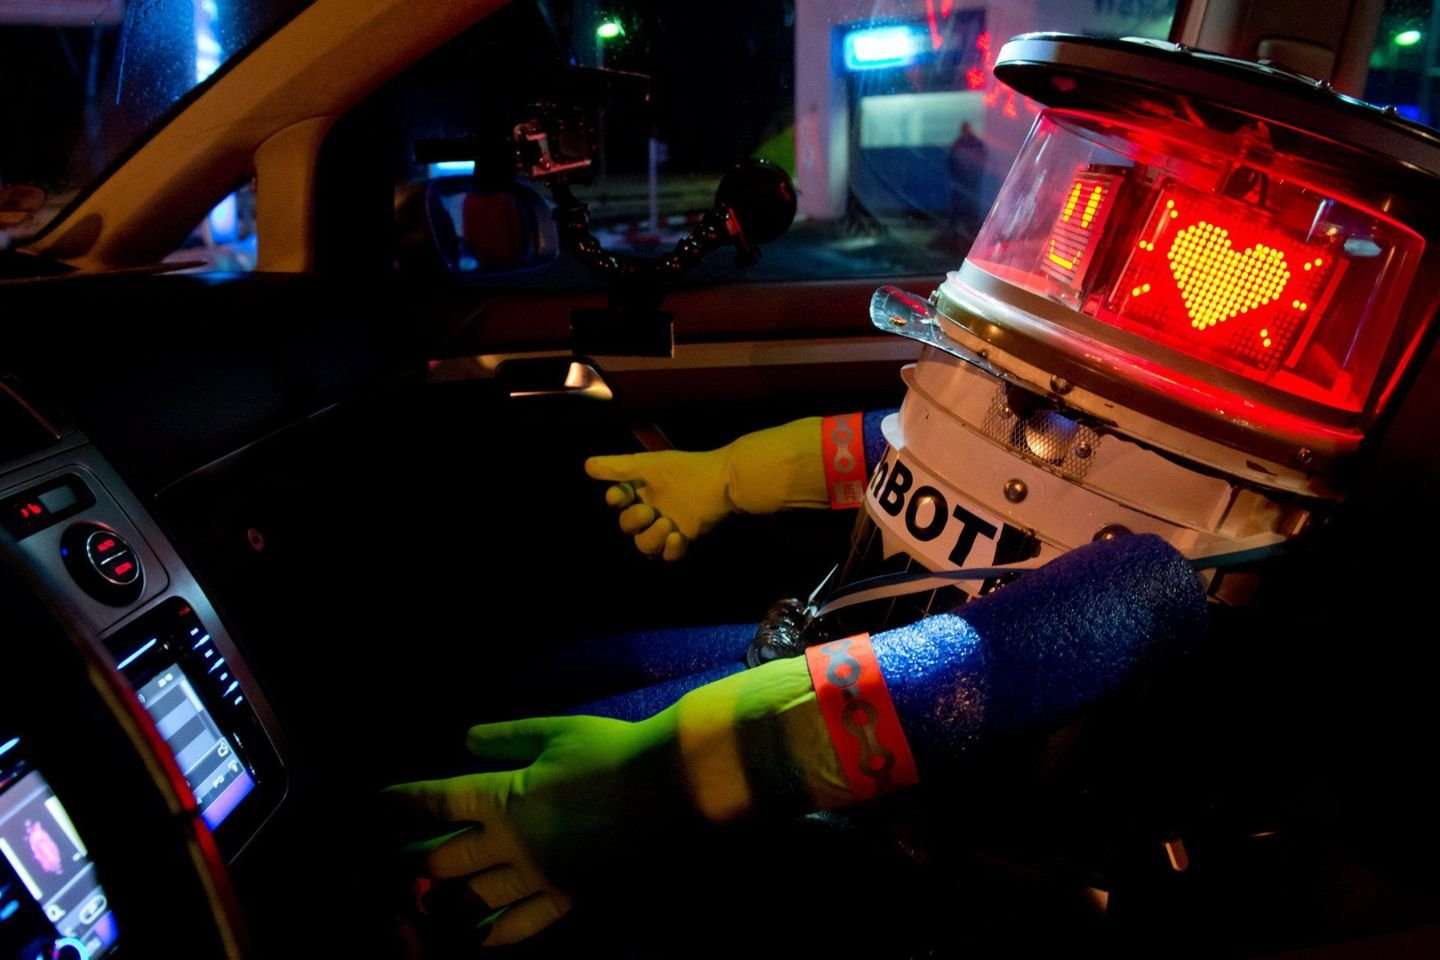 image for Hitchhiking robot that relied on human kindness found decapitated